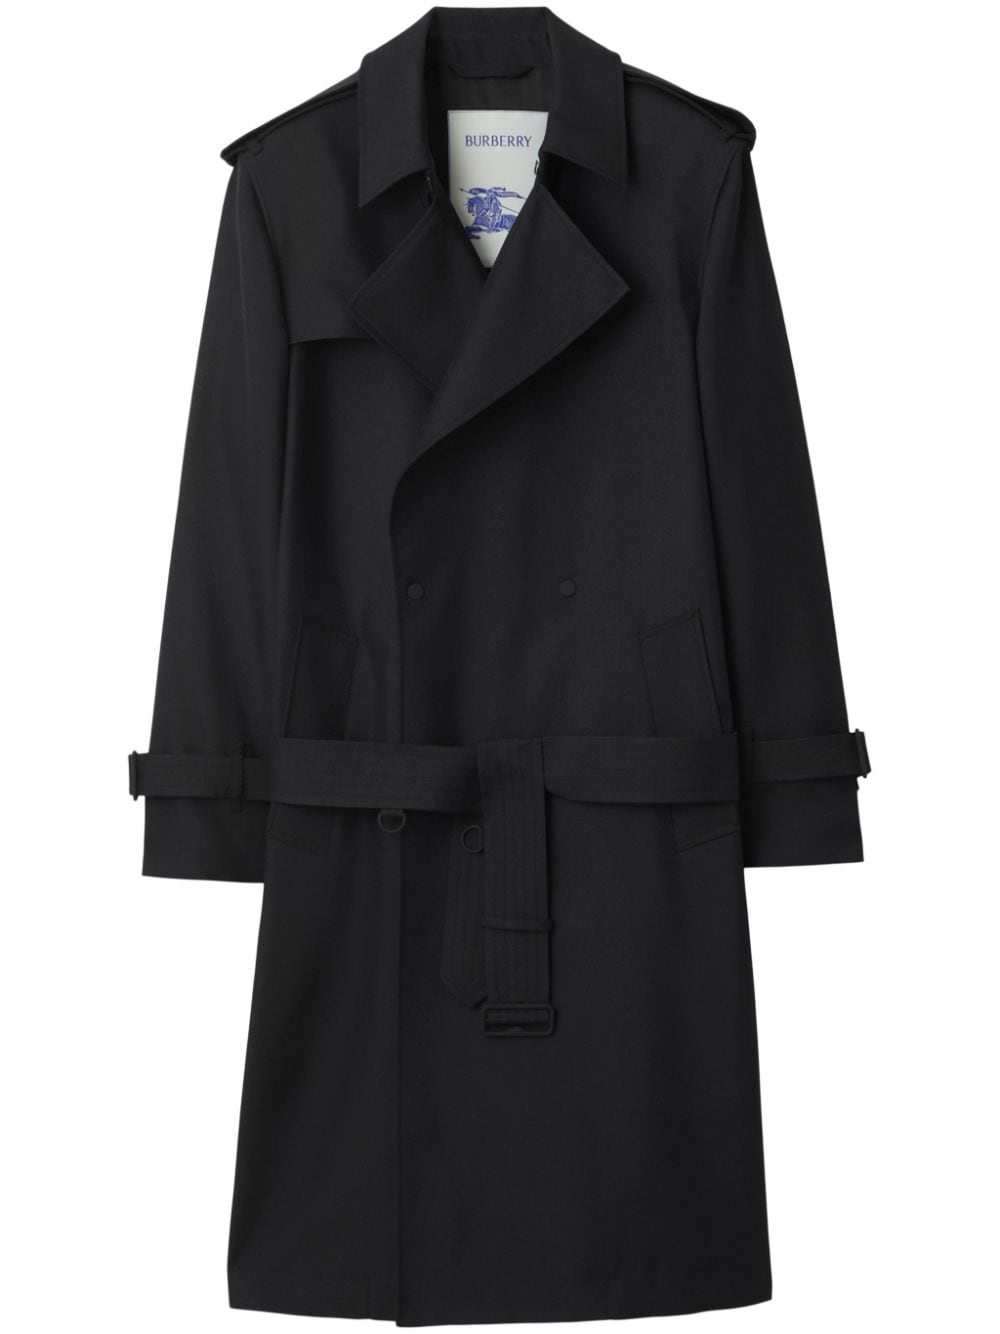 Burberry double-breasted belted trench coat - Black